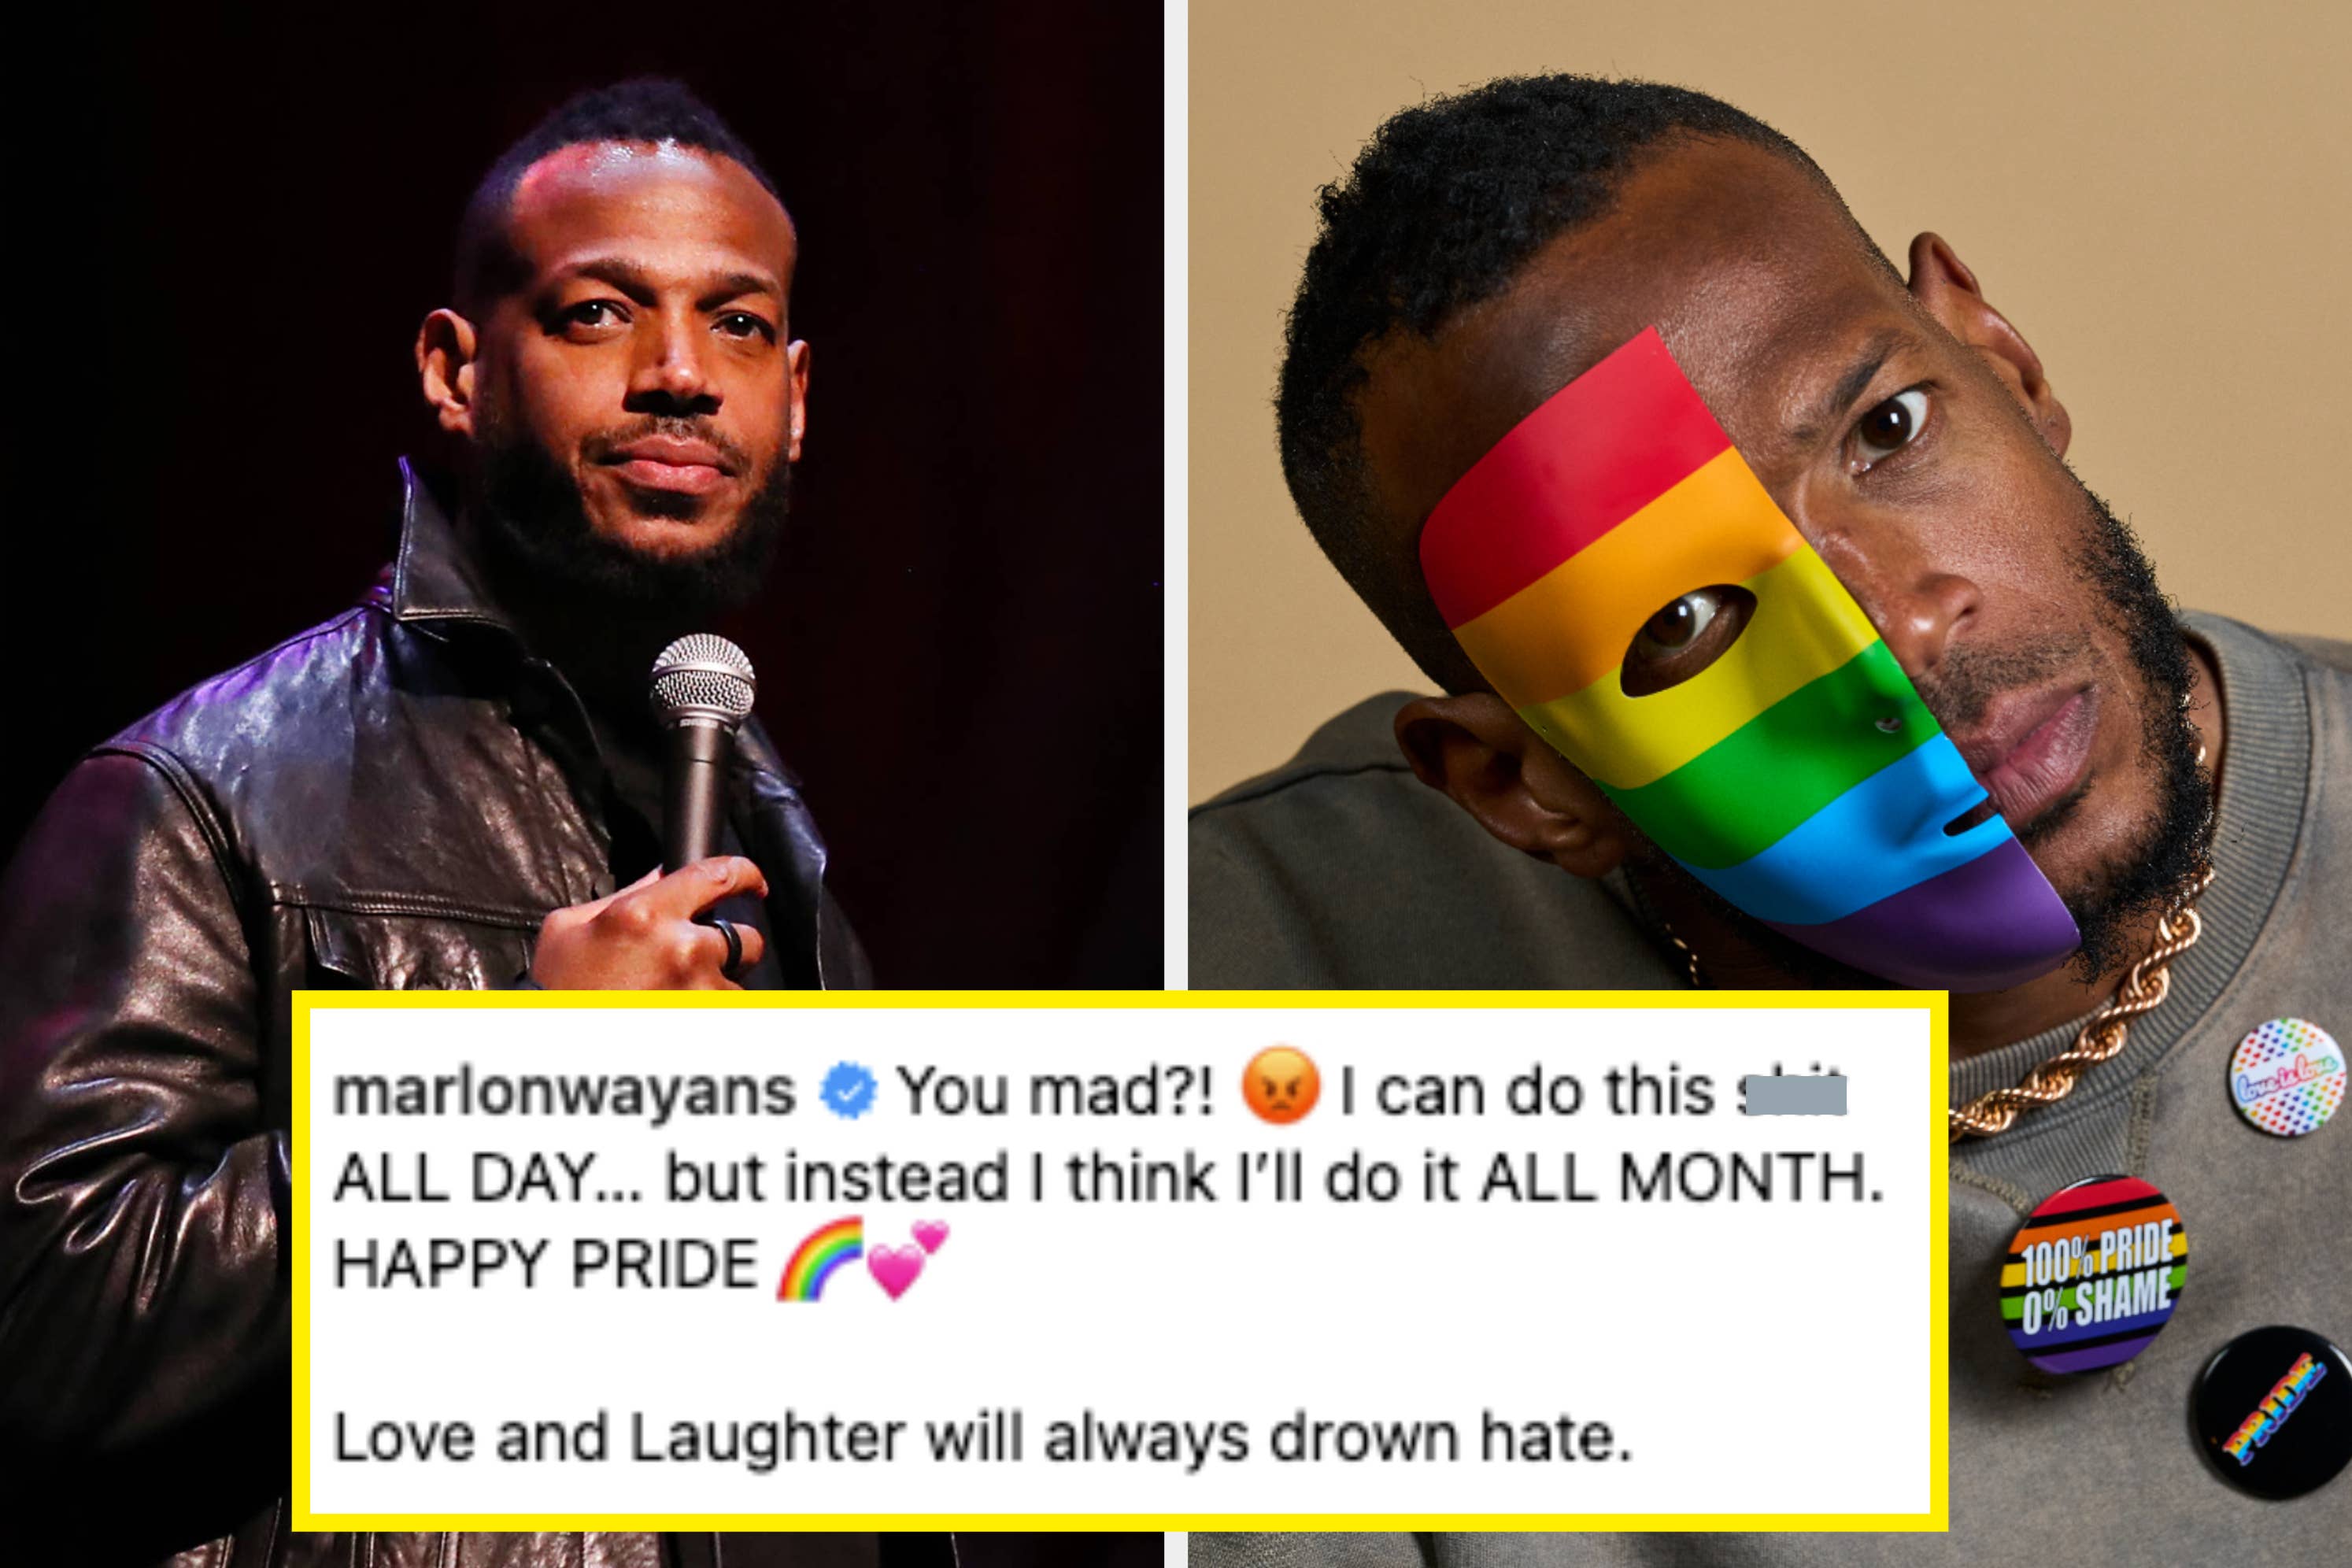 Marlon Wayans stands on stage with a microphone in one photo and speaks to someone in another. Text: "You mad?! I can do this ALL DAY... but instead I think I'll do it ALL MONTH. HAPPY PRIDE 🌈💕 Love and Laughter will always drown hate."